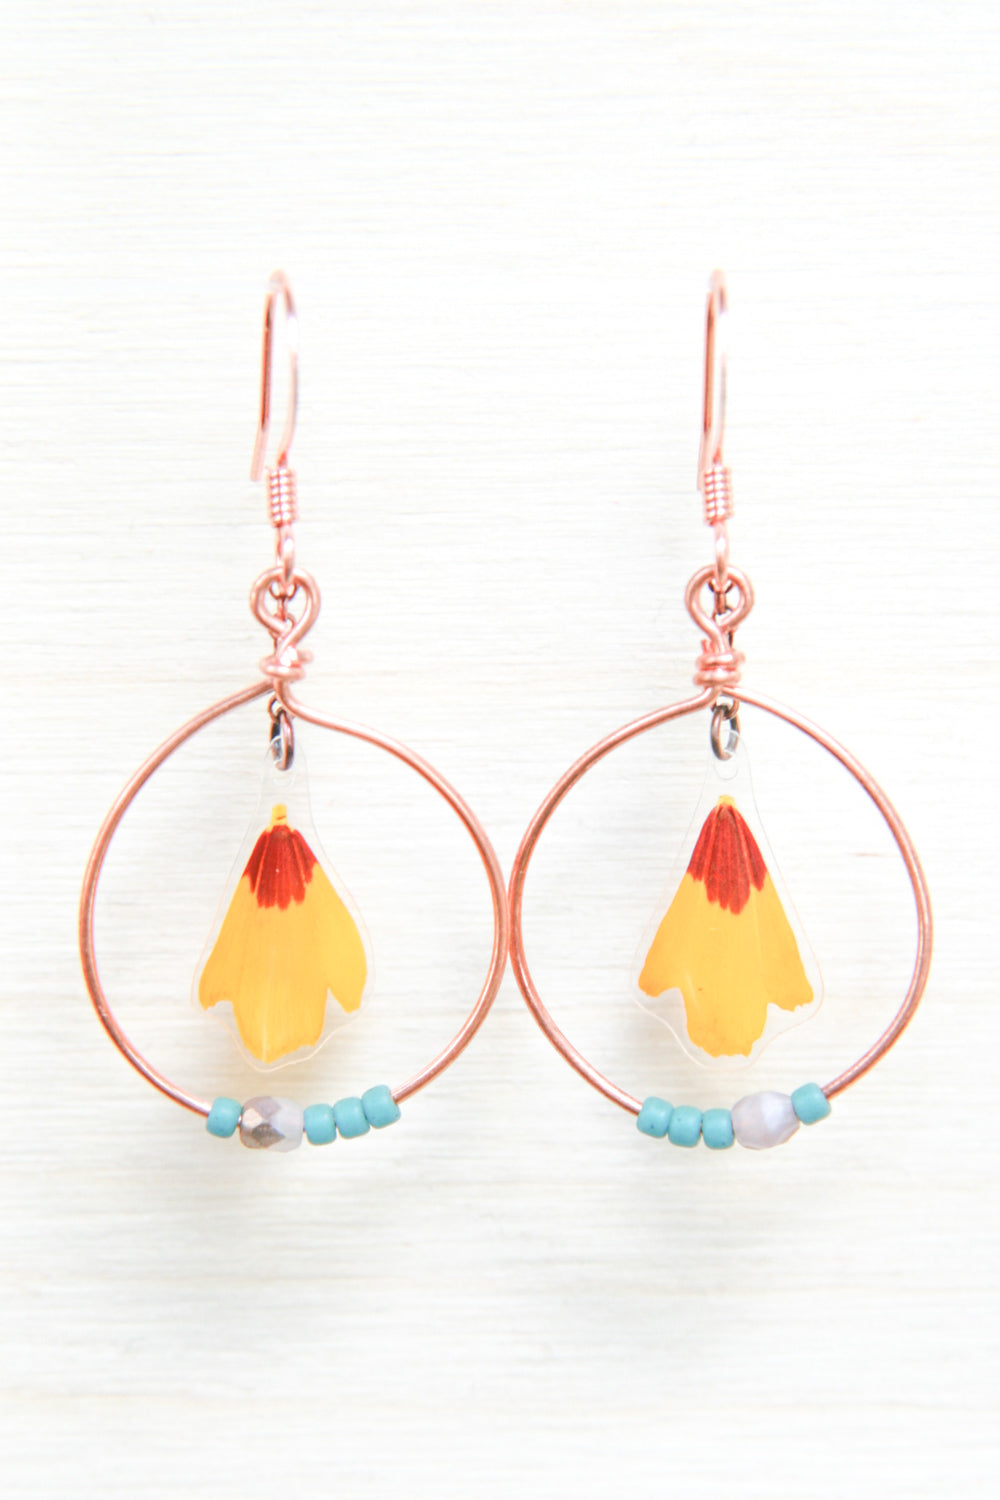 Yellow Coreopsis Pressed Flower Earrings with Copper Hoop & Glass Beads